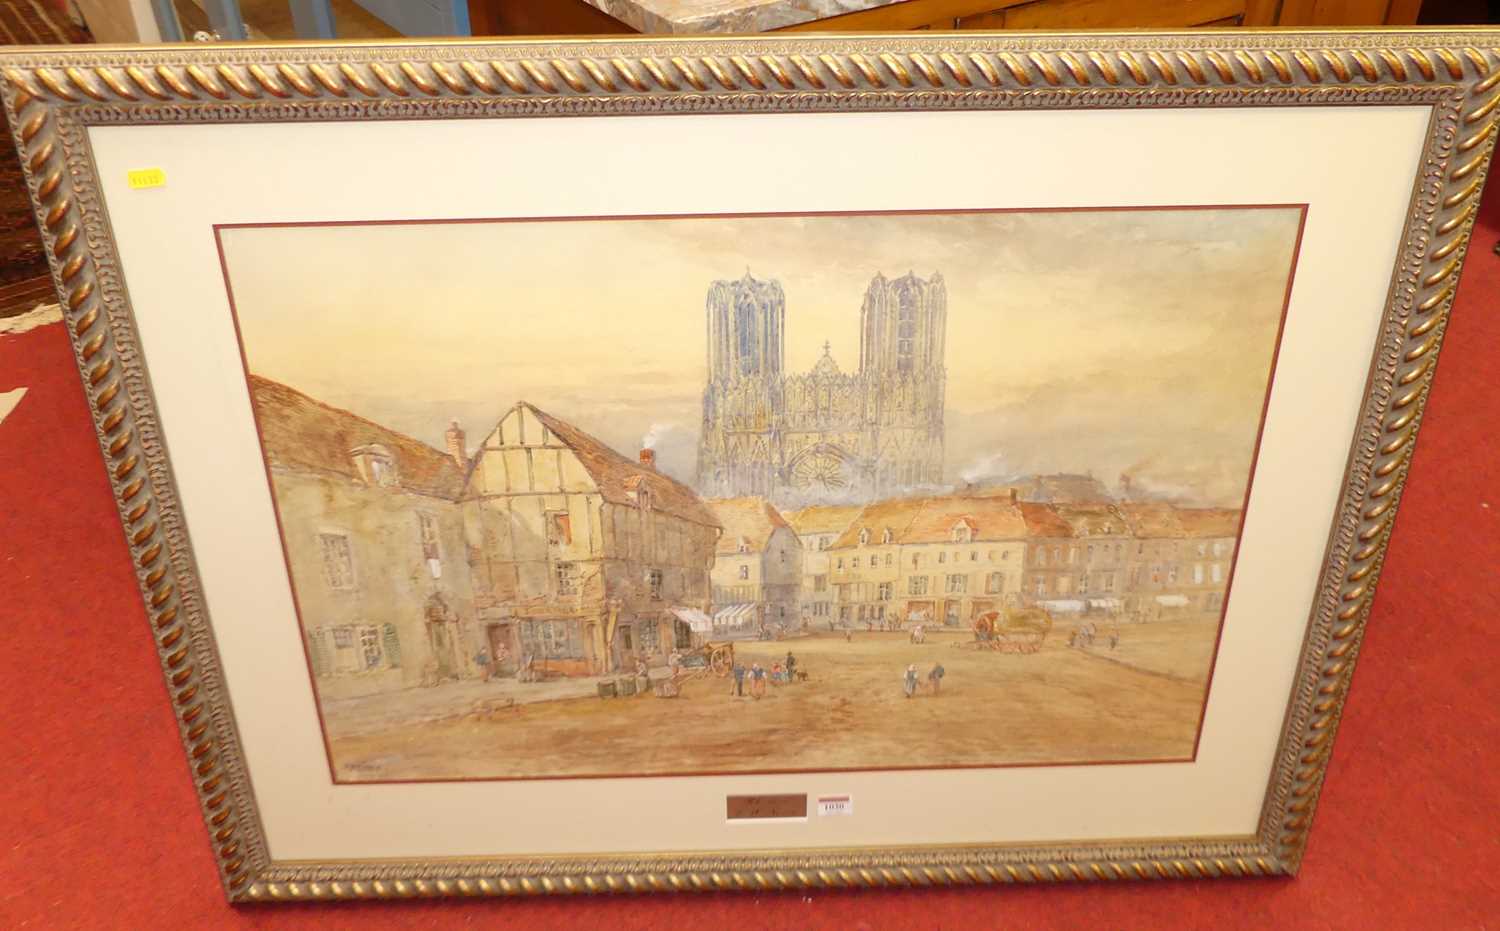 Edward W. Nevil (c1880-1900) - Pair; Rheims and Ypres, watercolours, signed lower right, 50 x 76cm